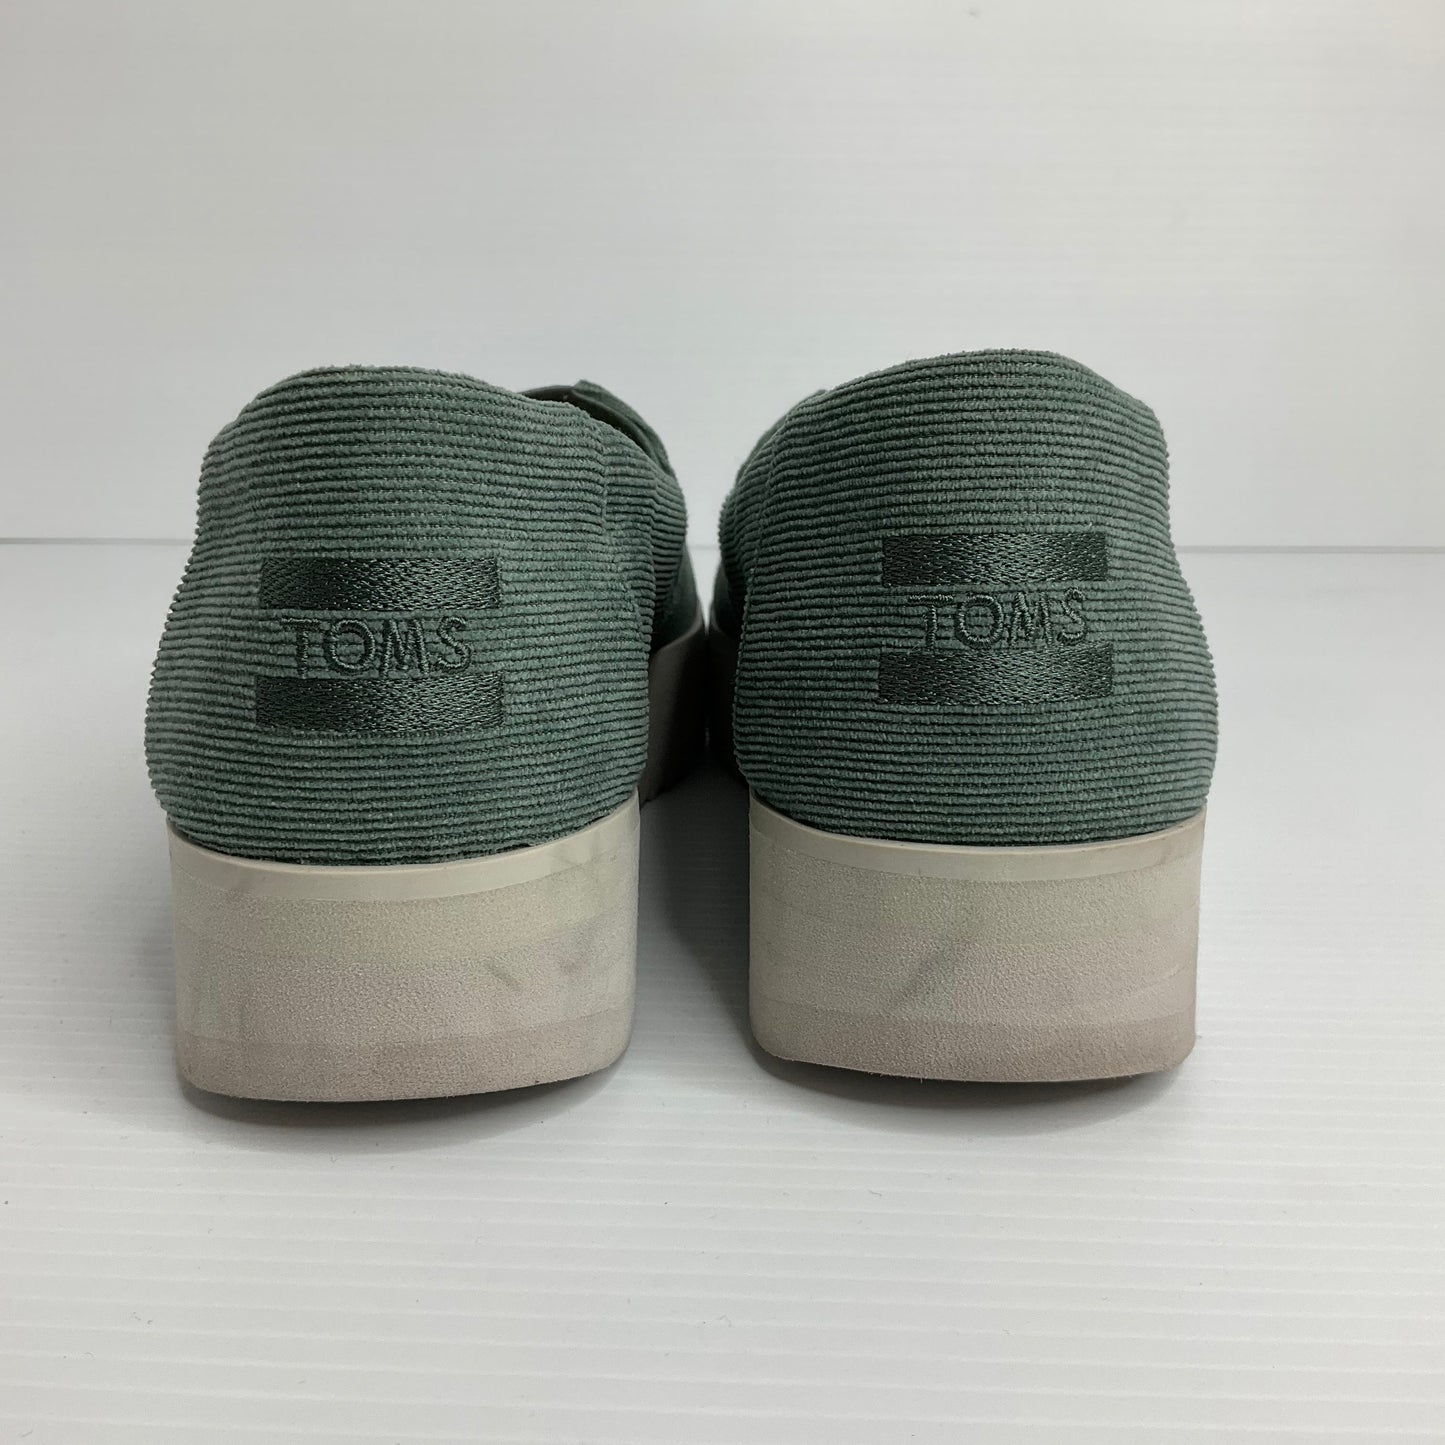 Green Shoes Flats Toms, Size 7.5